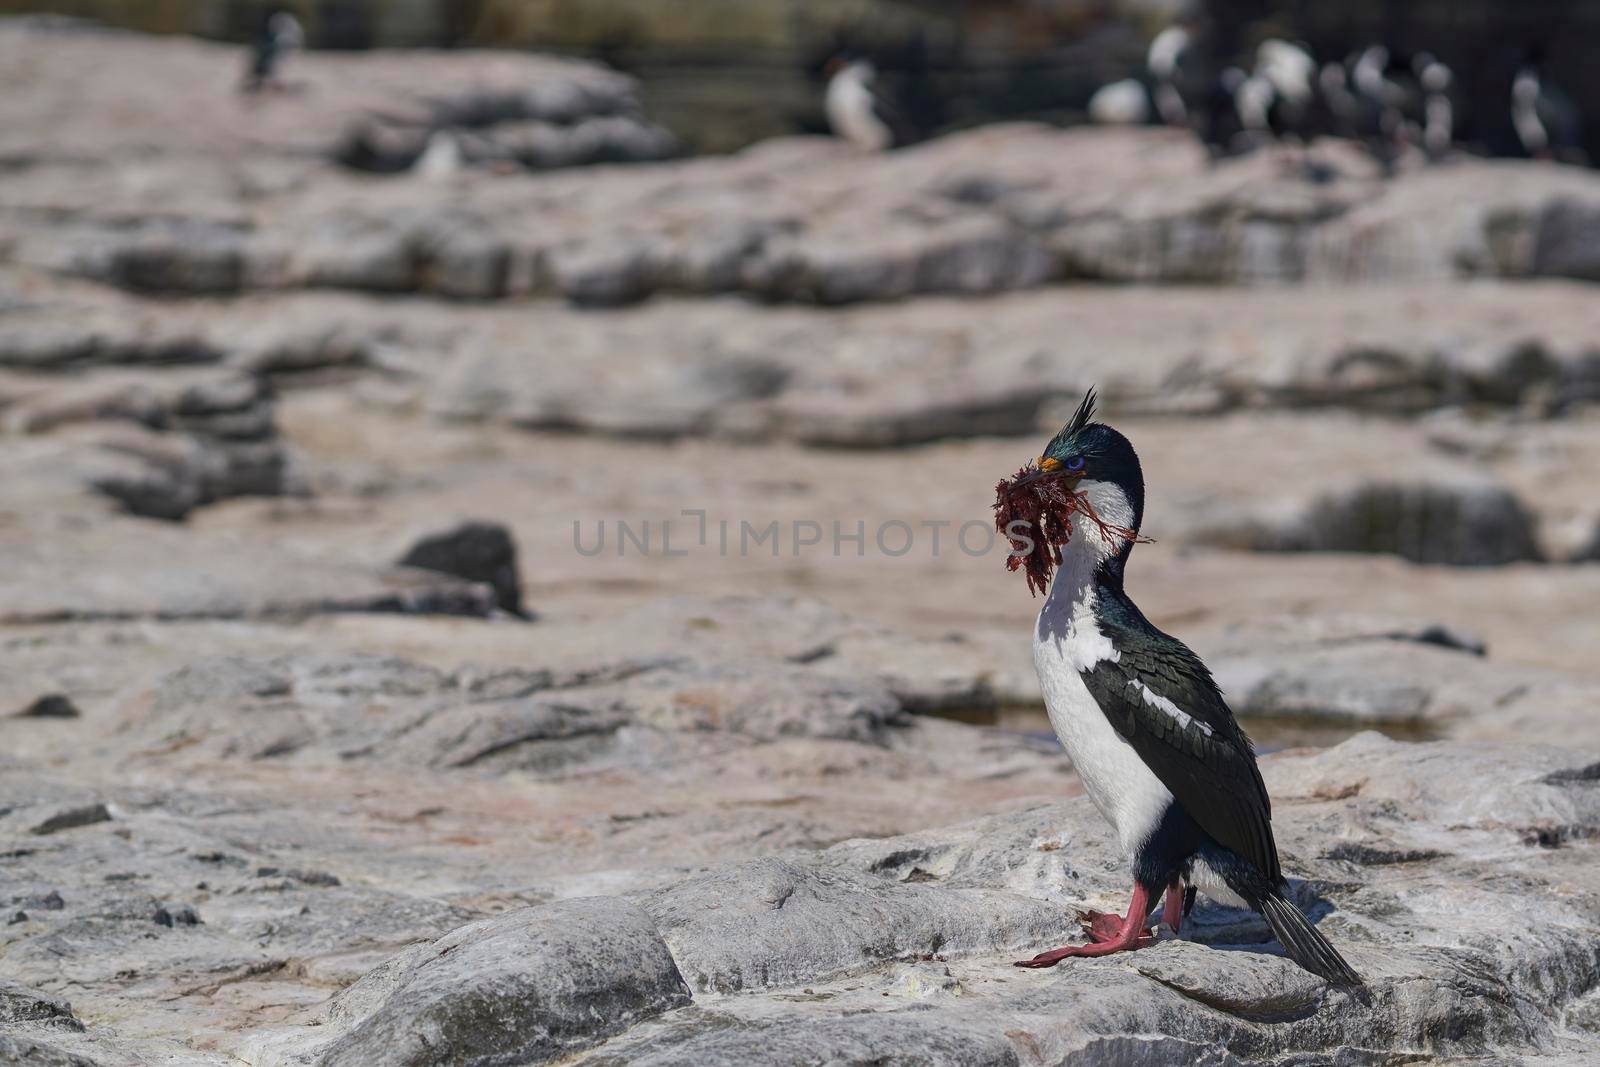 Imperial Shag (Phalacrocorax atriceps albiventer) carrying seaweed to be used as nesting material on Sea Lion Island in the Falkland Islands